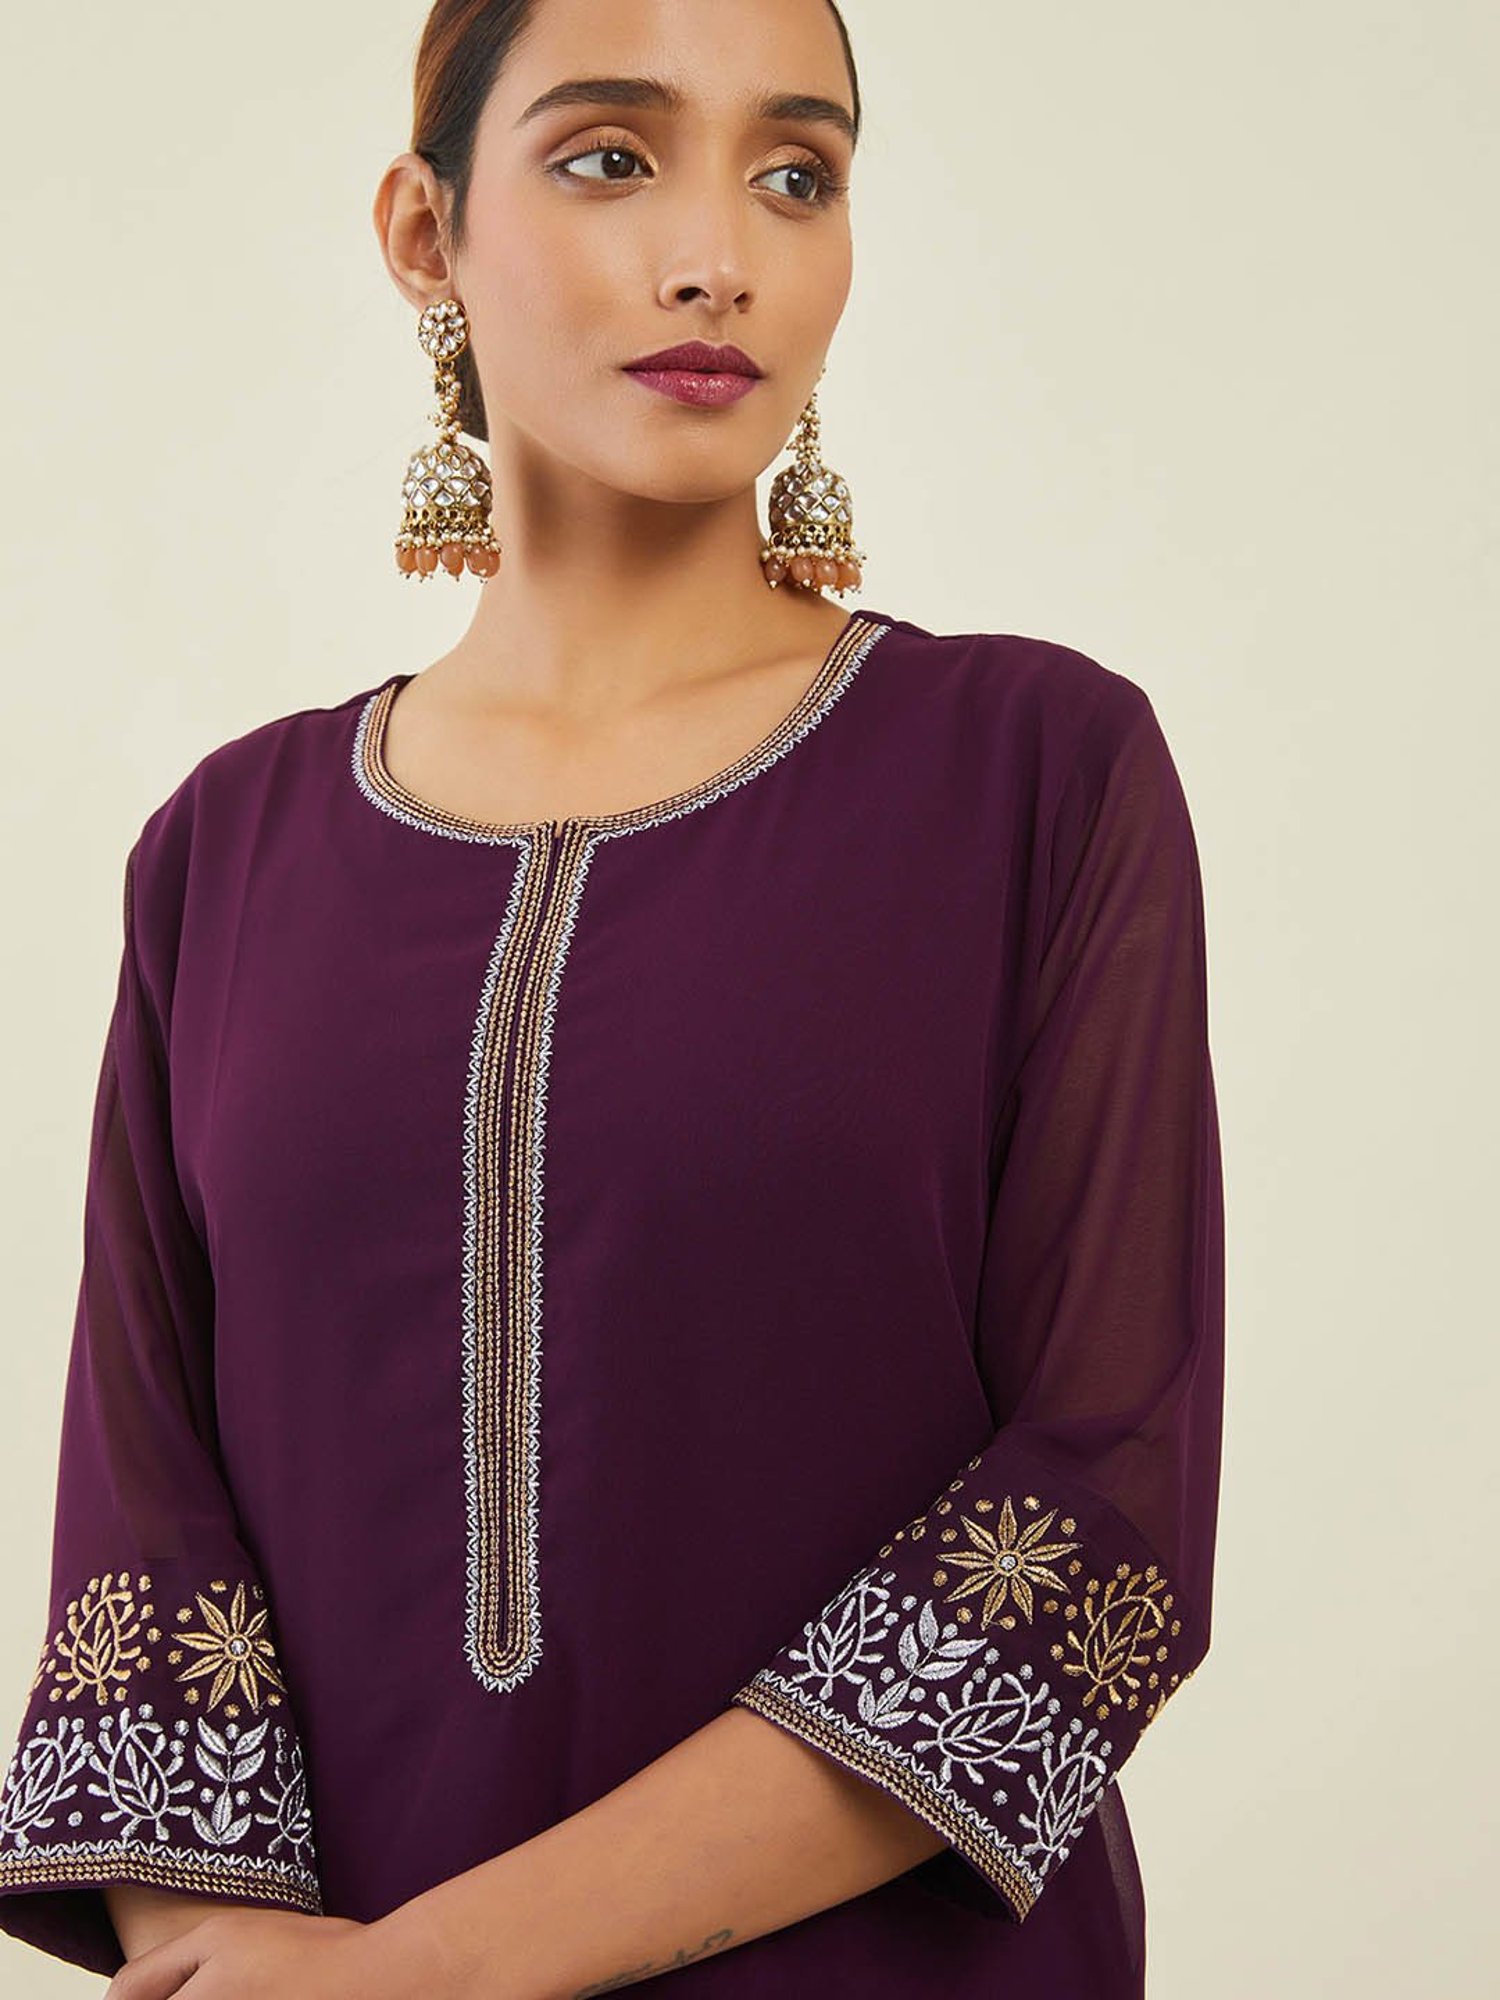 Soch - Elevate your unique style with exquisite Kurti Suits and create a  statement-worthy look. Shop stunning ensembles from Soch at a store near  you or click here: https://www.soch.com/ #kurtis #kurtilover #kurtisuits #